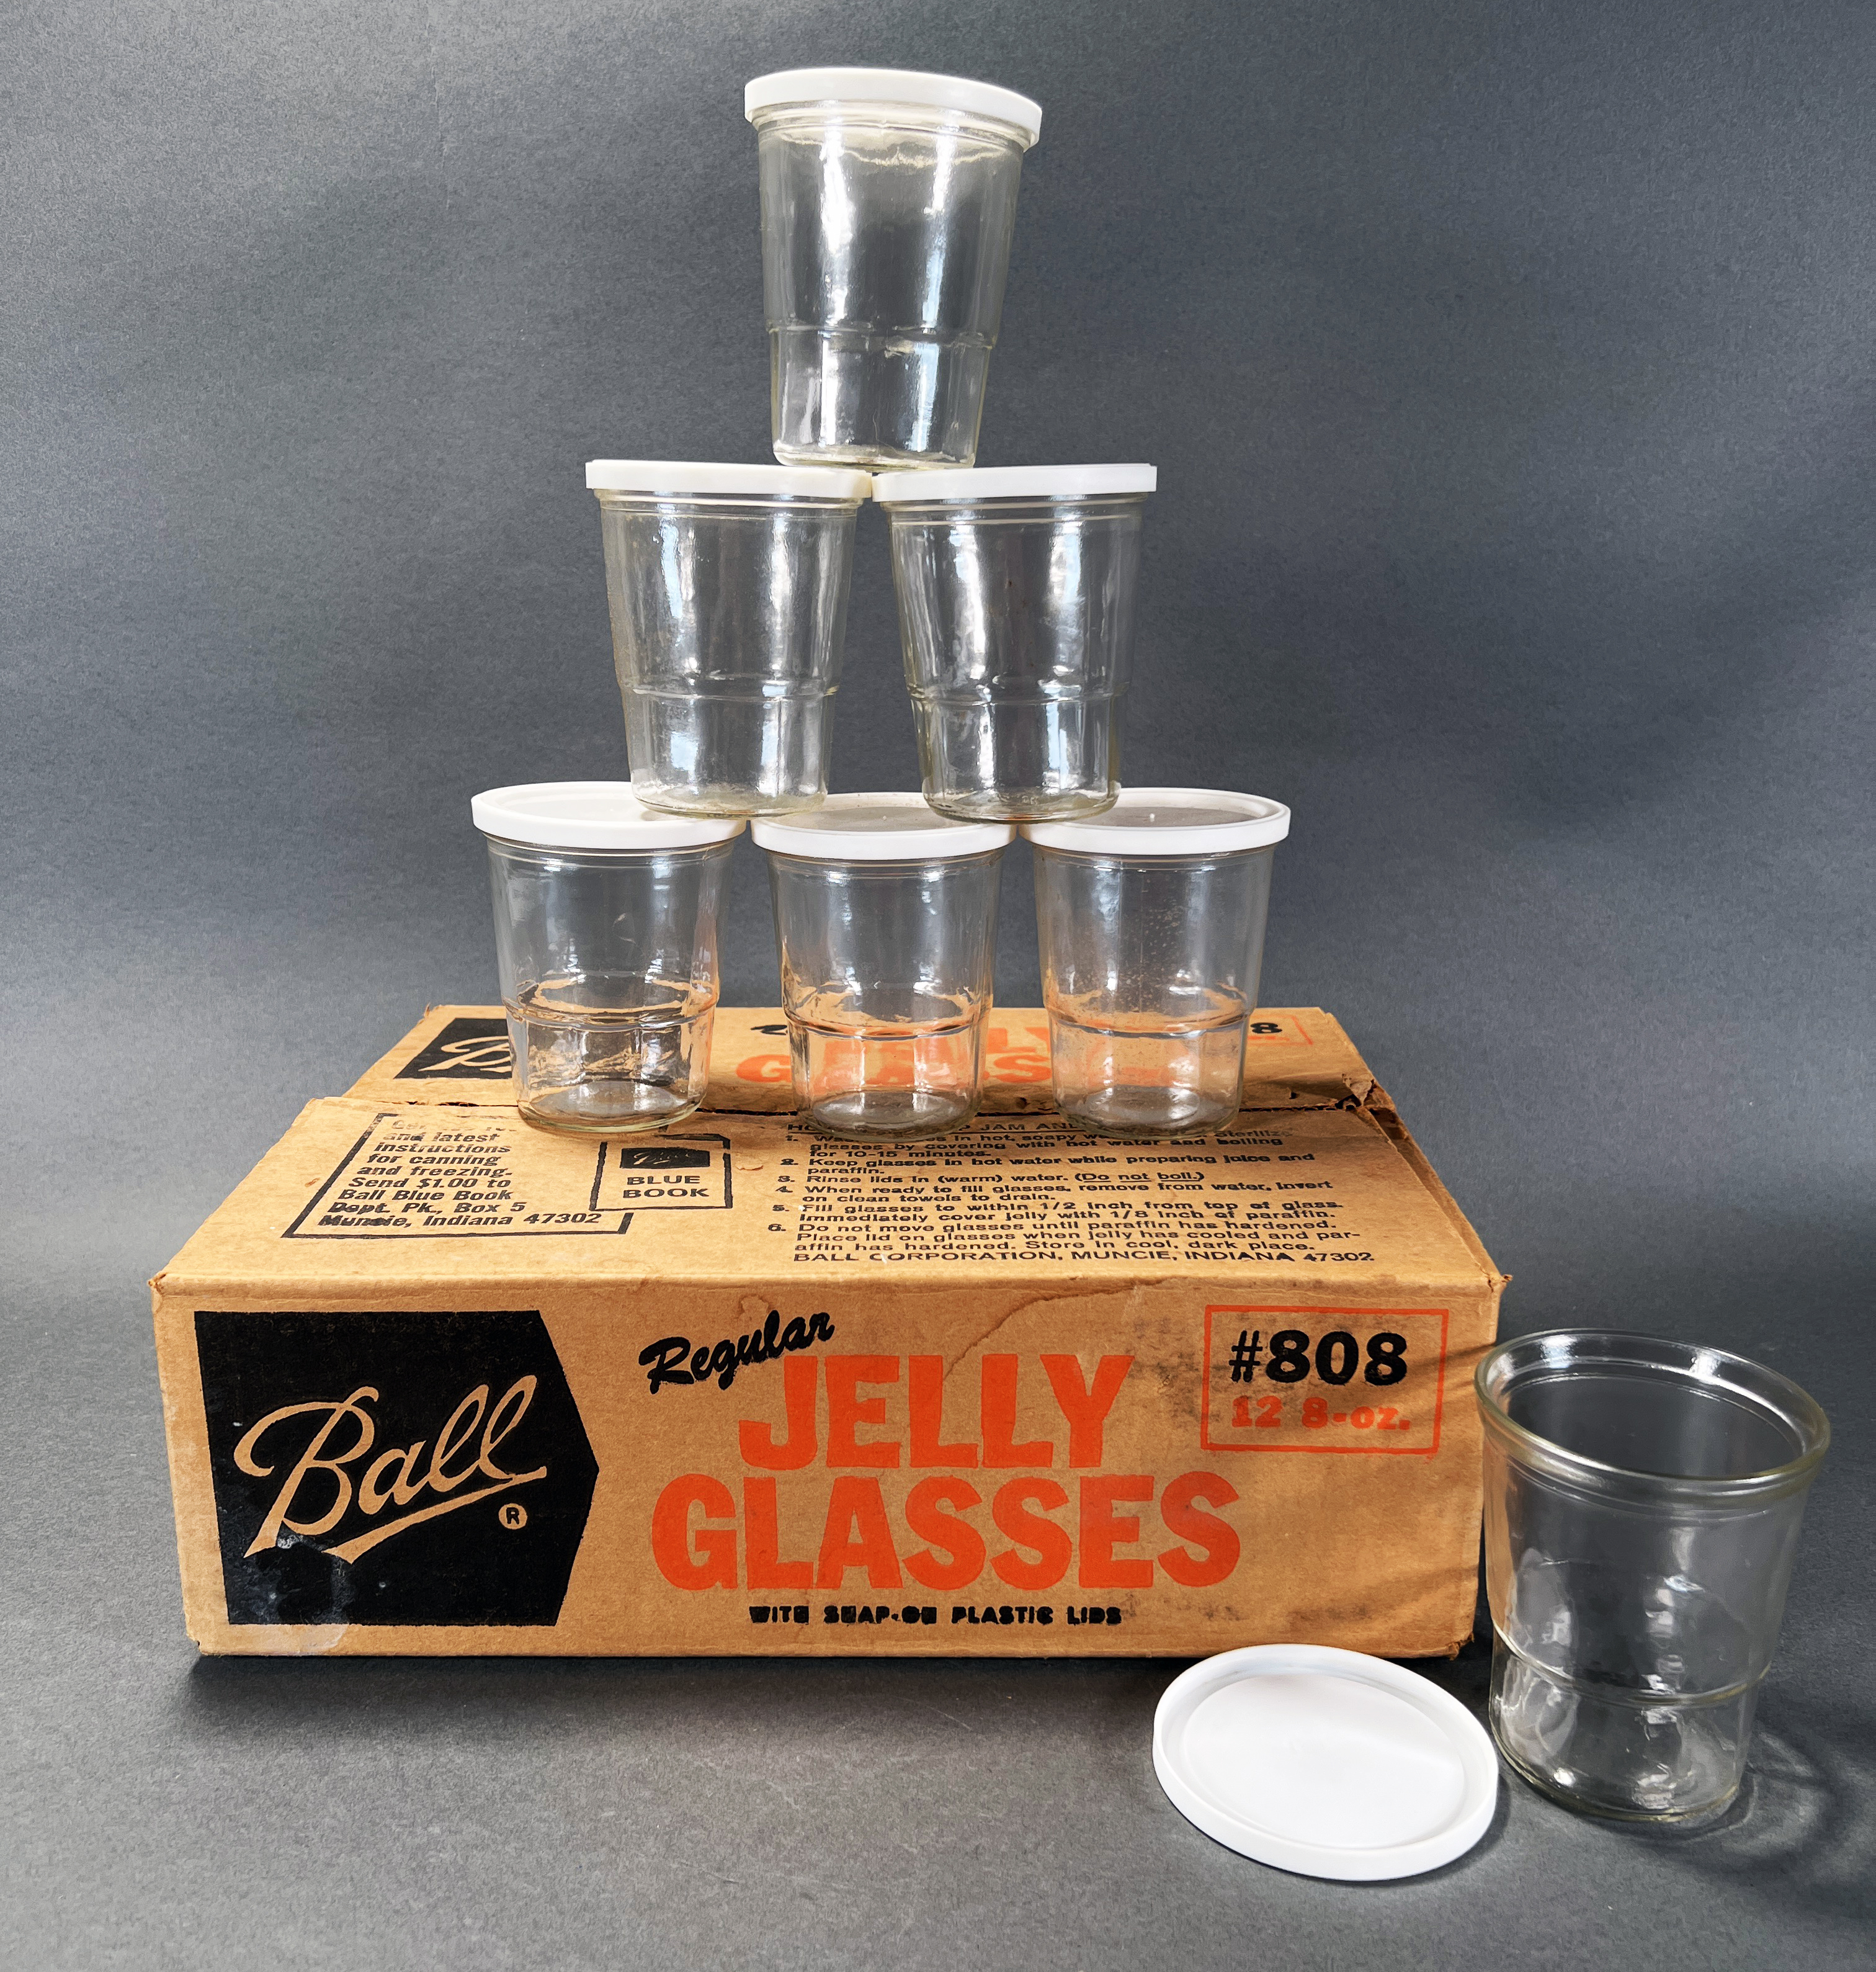 7 Ball Jelly Glasses With Plastic Lids In Box image 1